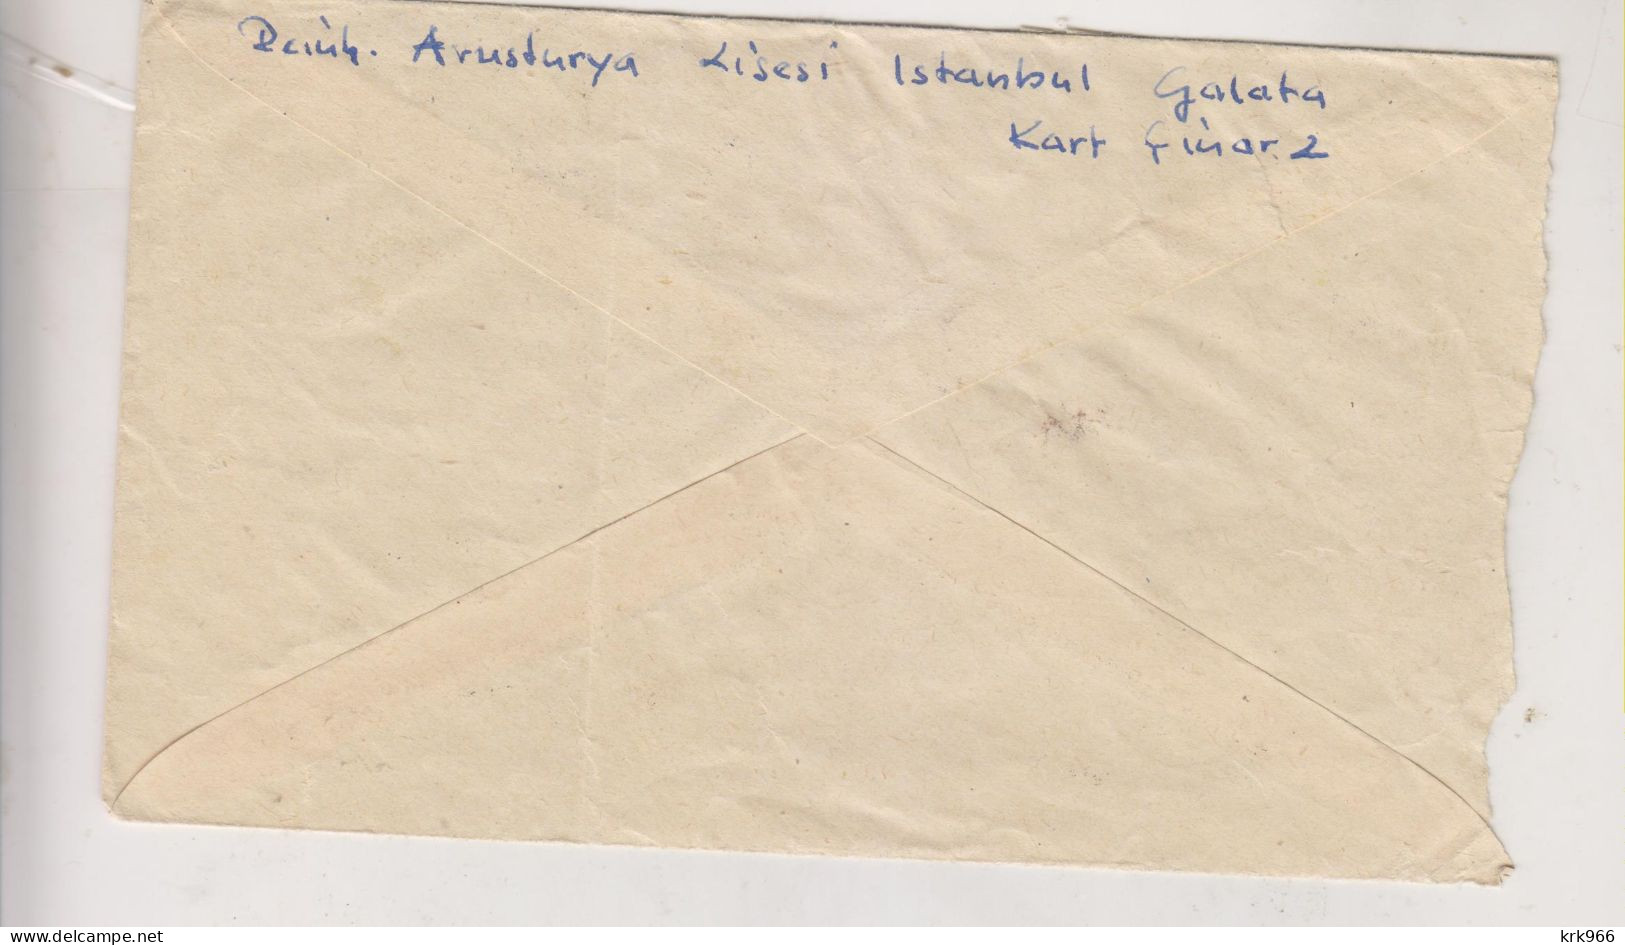 TURKEY 1959 ISTANBUL GALATA Nice Airmail Cover To Austria - Lettres & Documents